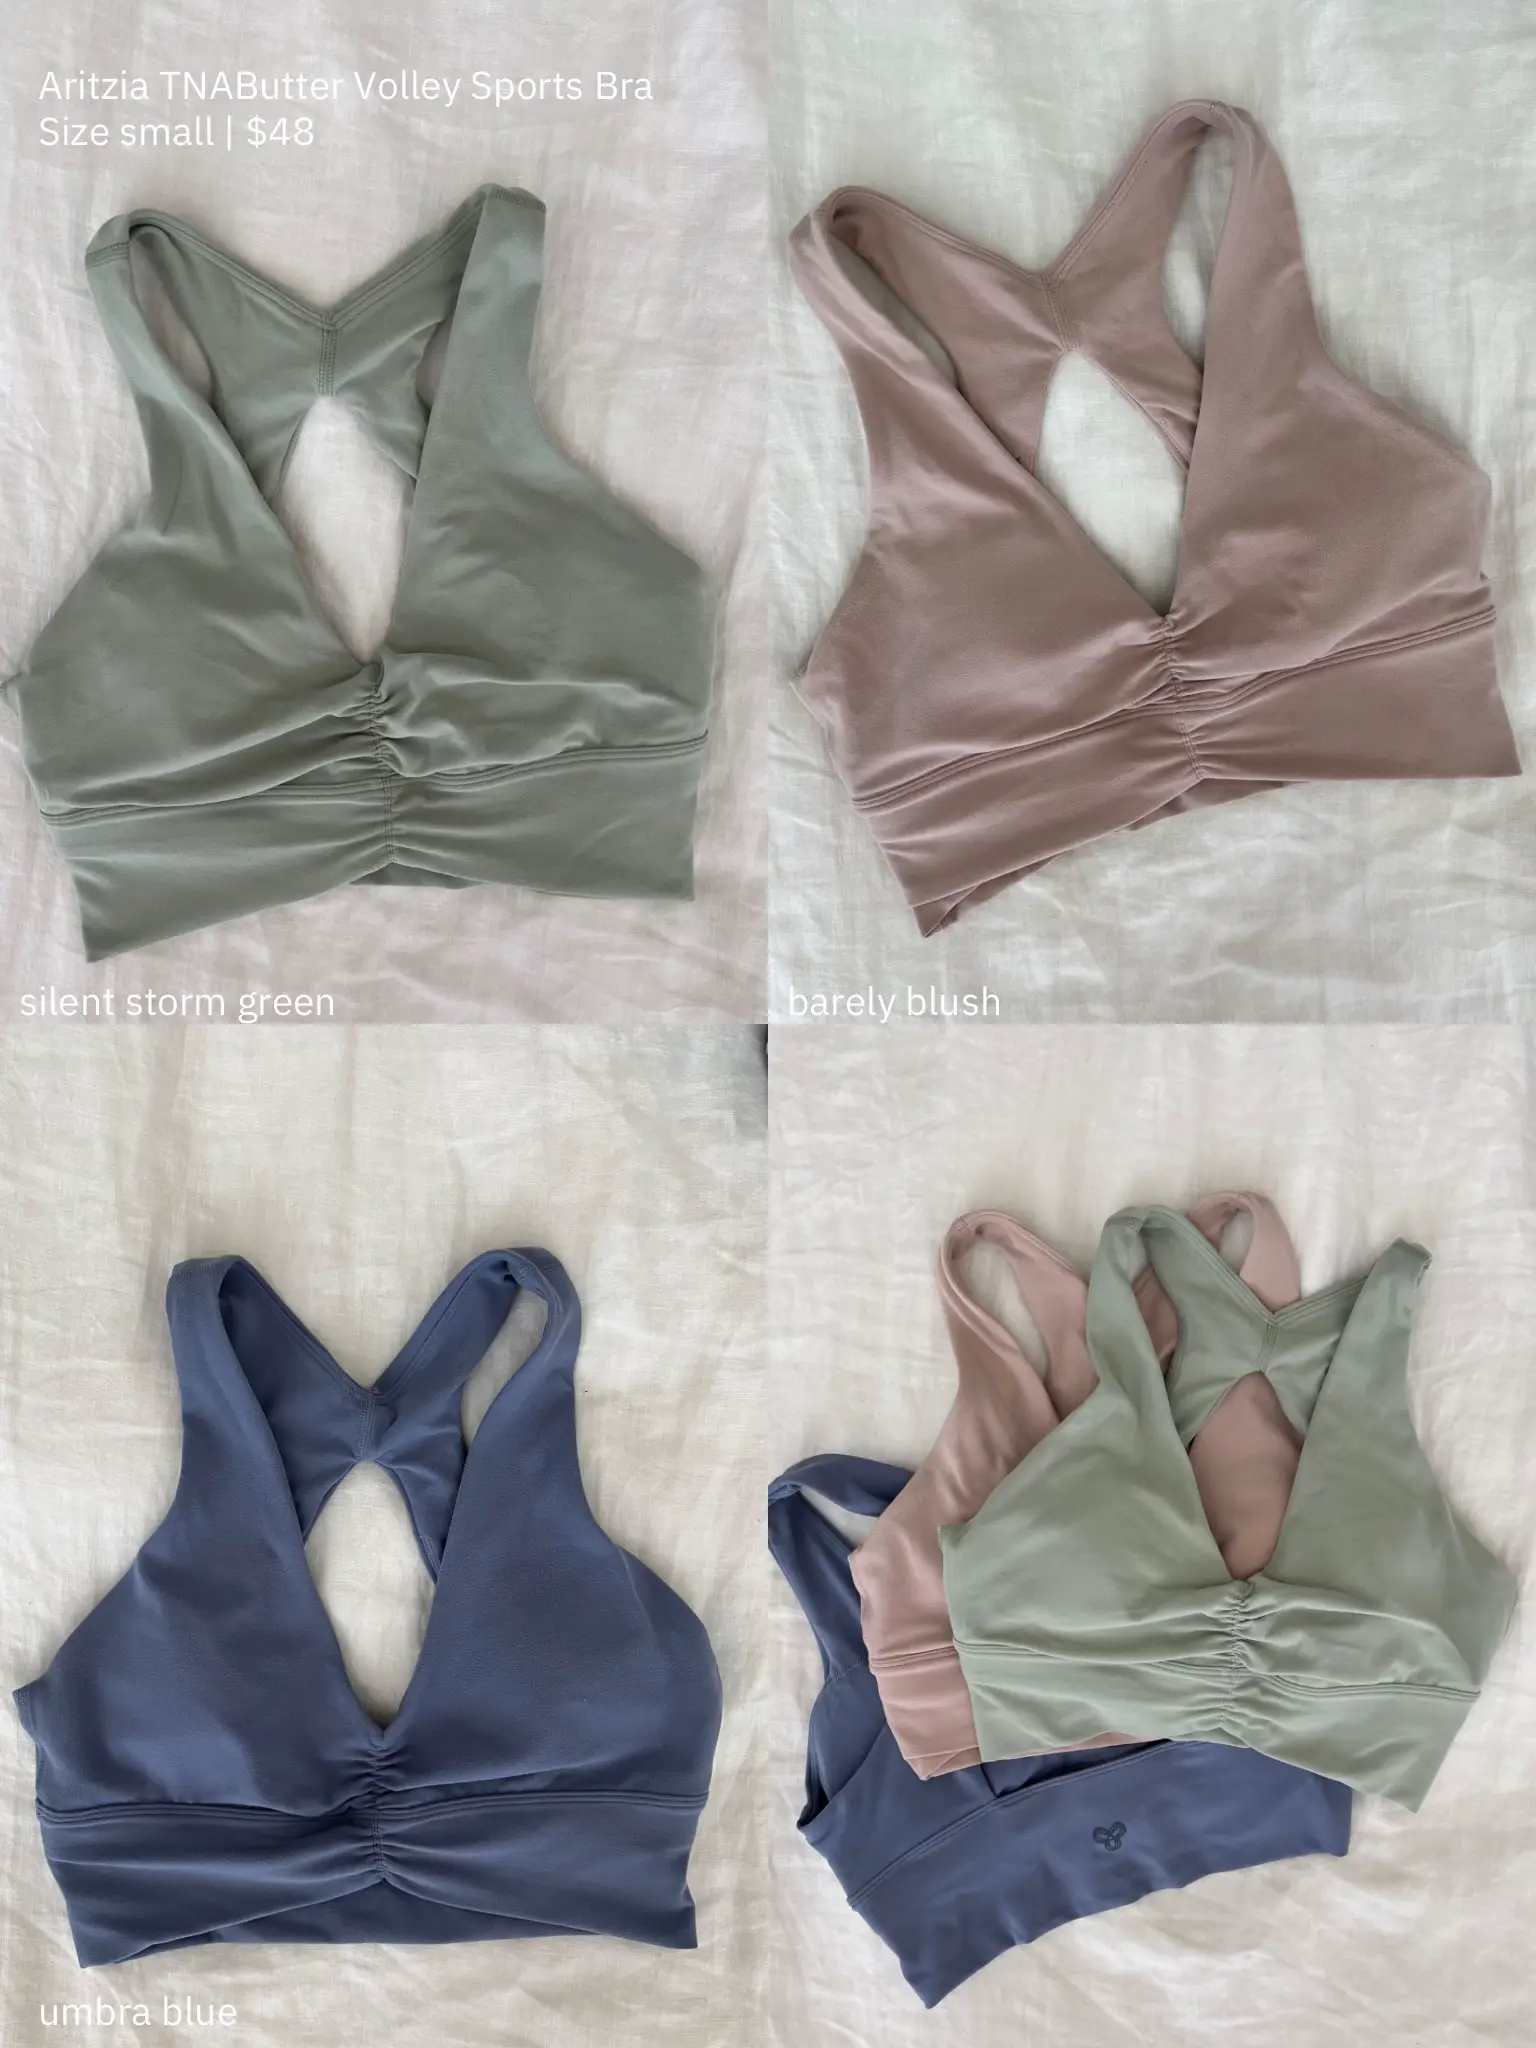 Aritzia TNAButter Sports Bra: review!, Gallery posted by stephanie tran